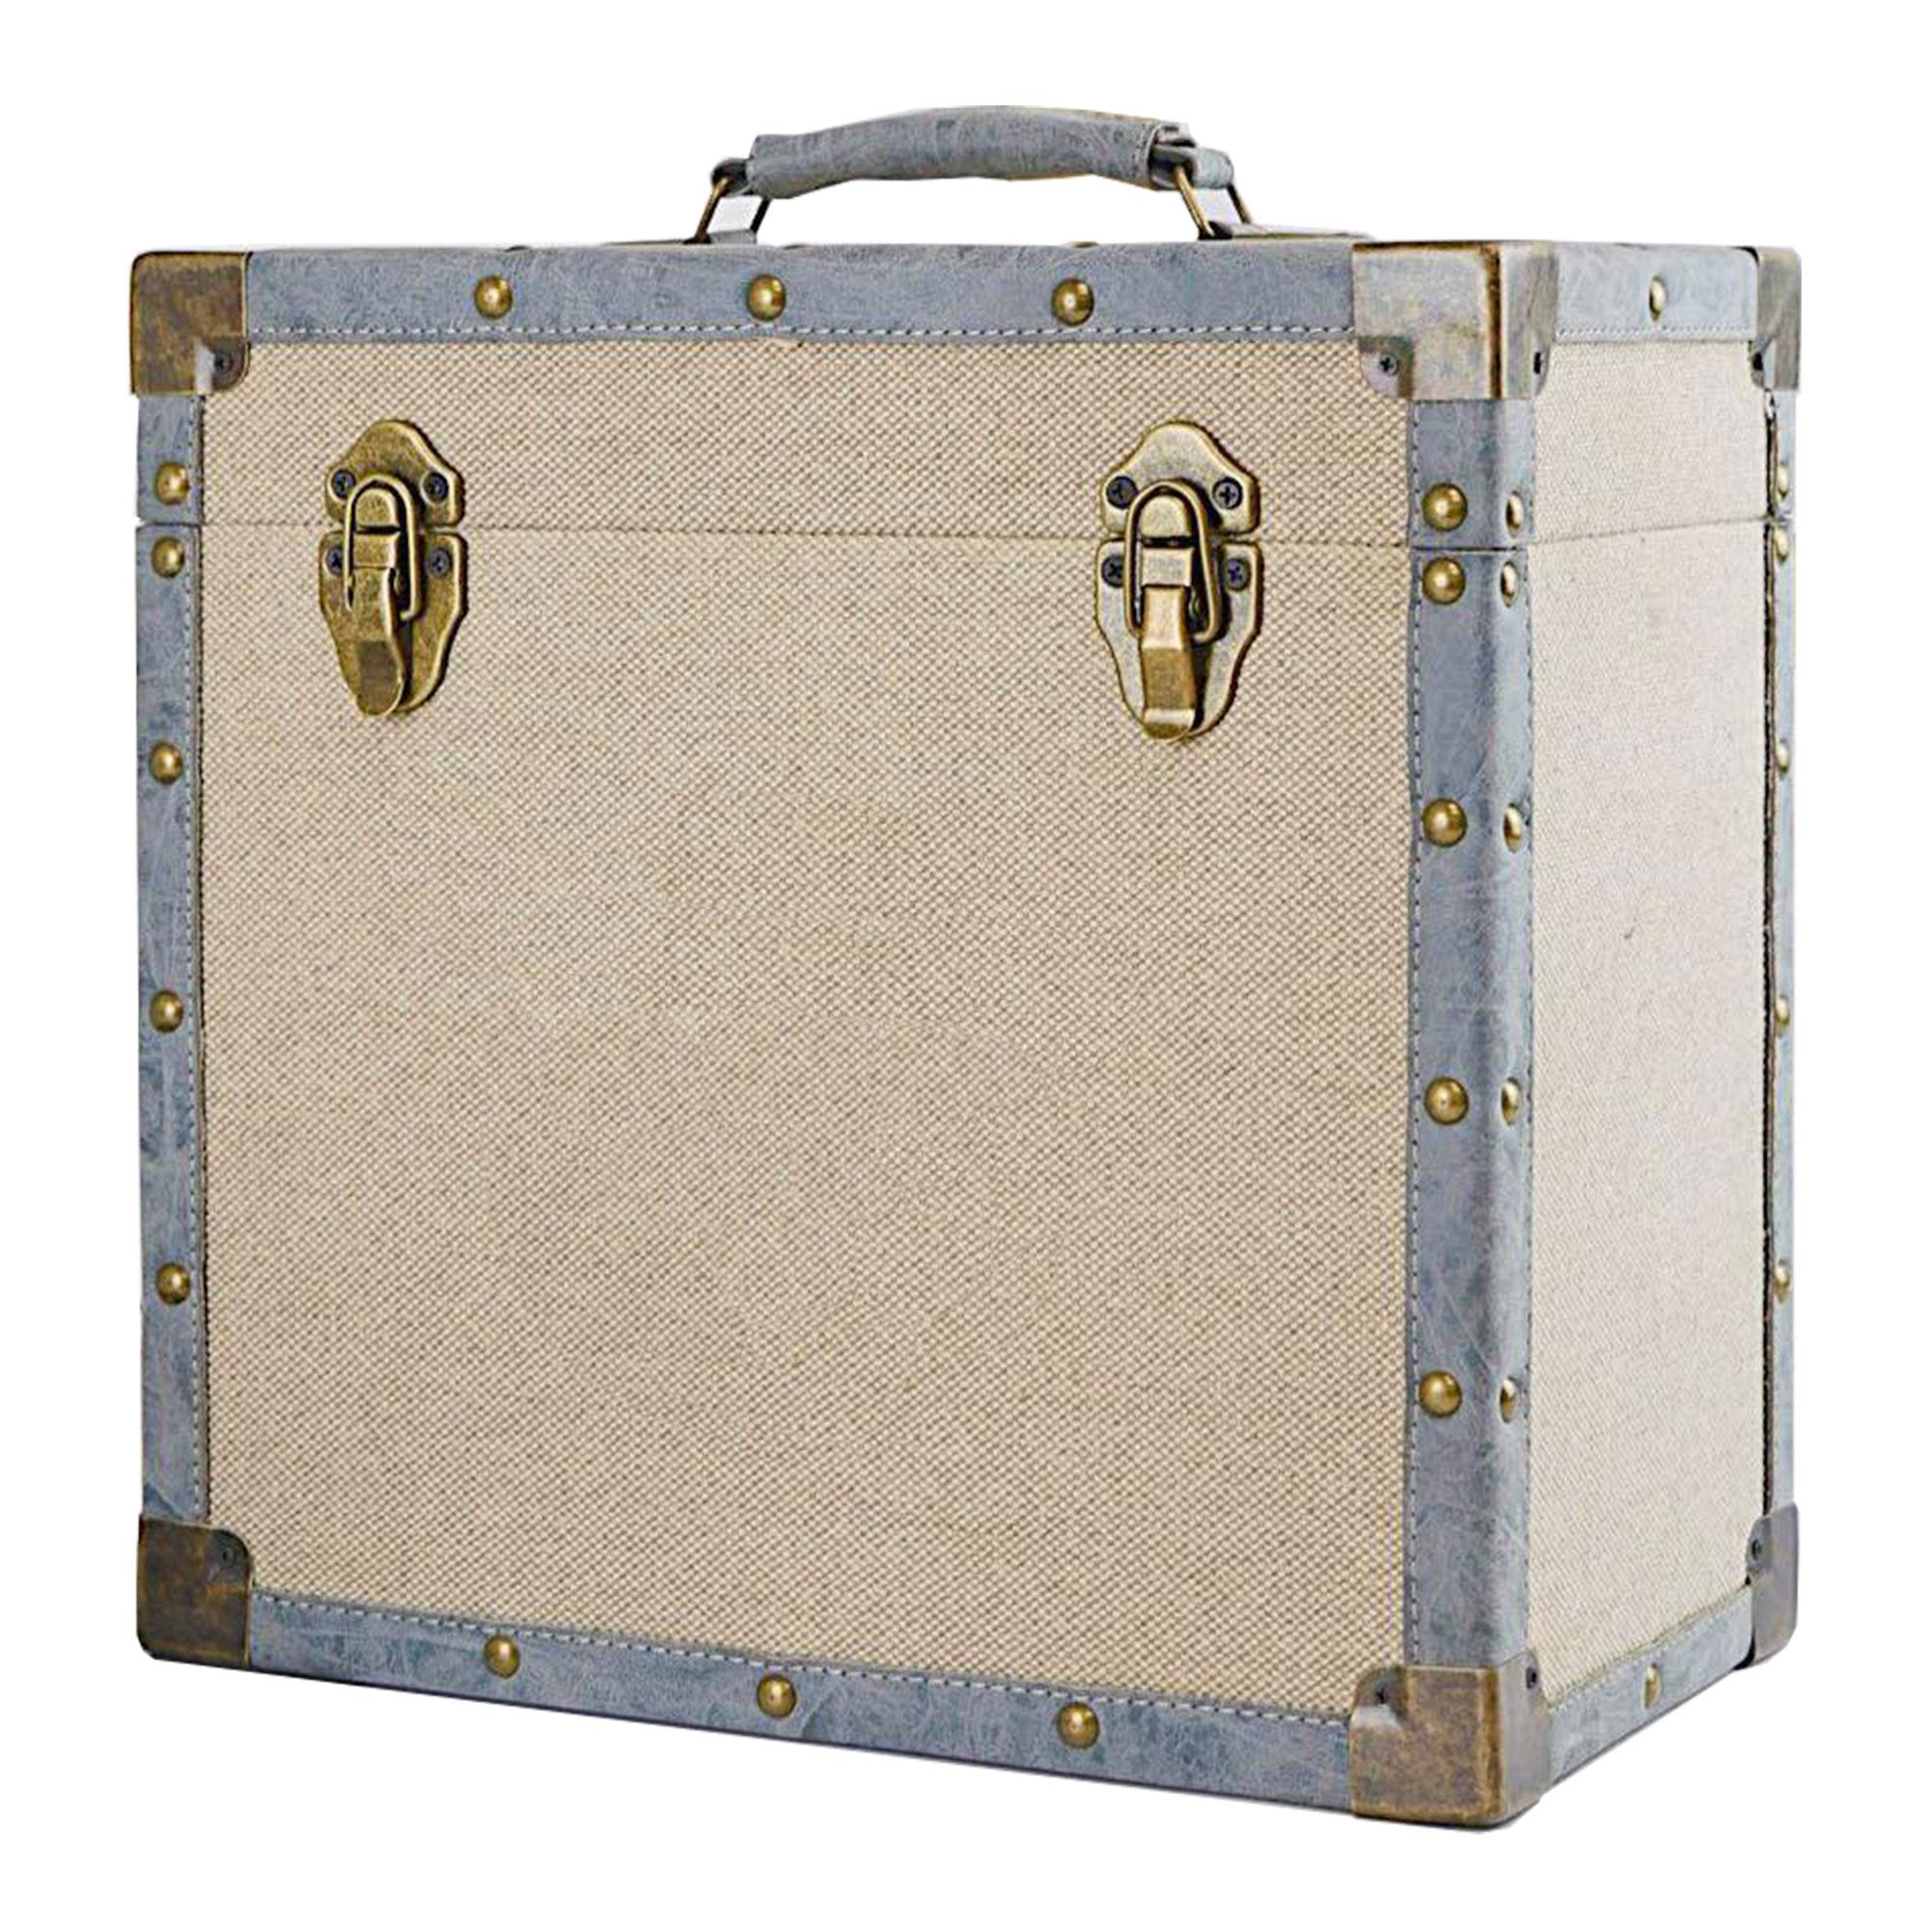 12 inch Vintage Luggage Style LP Vinyl Storage Case - Cream Cloth and Grey Faux Leather edging